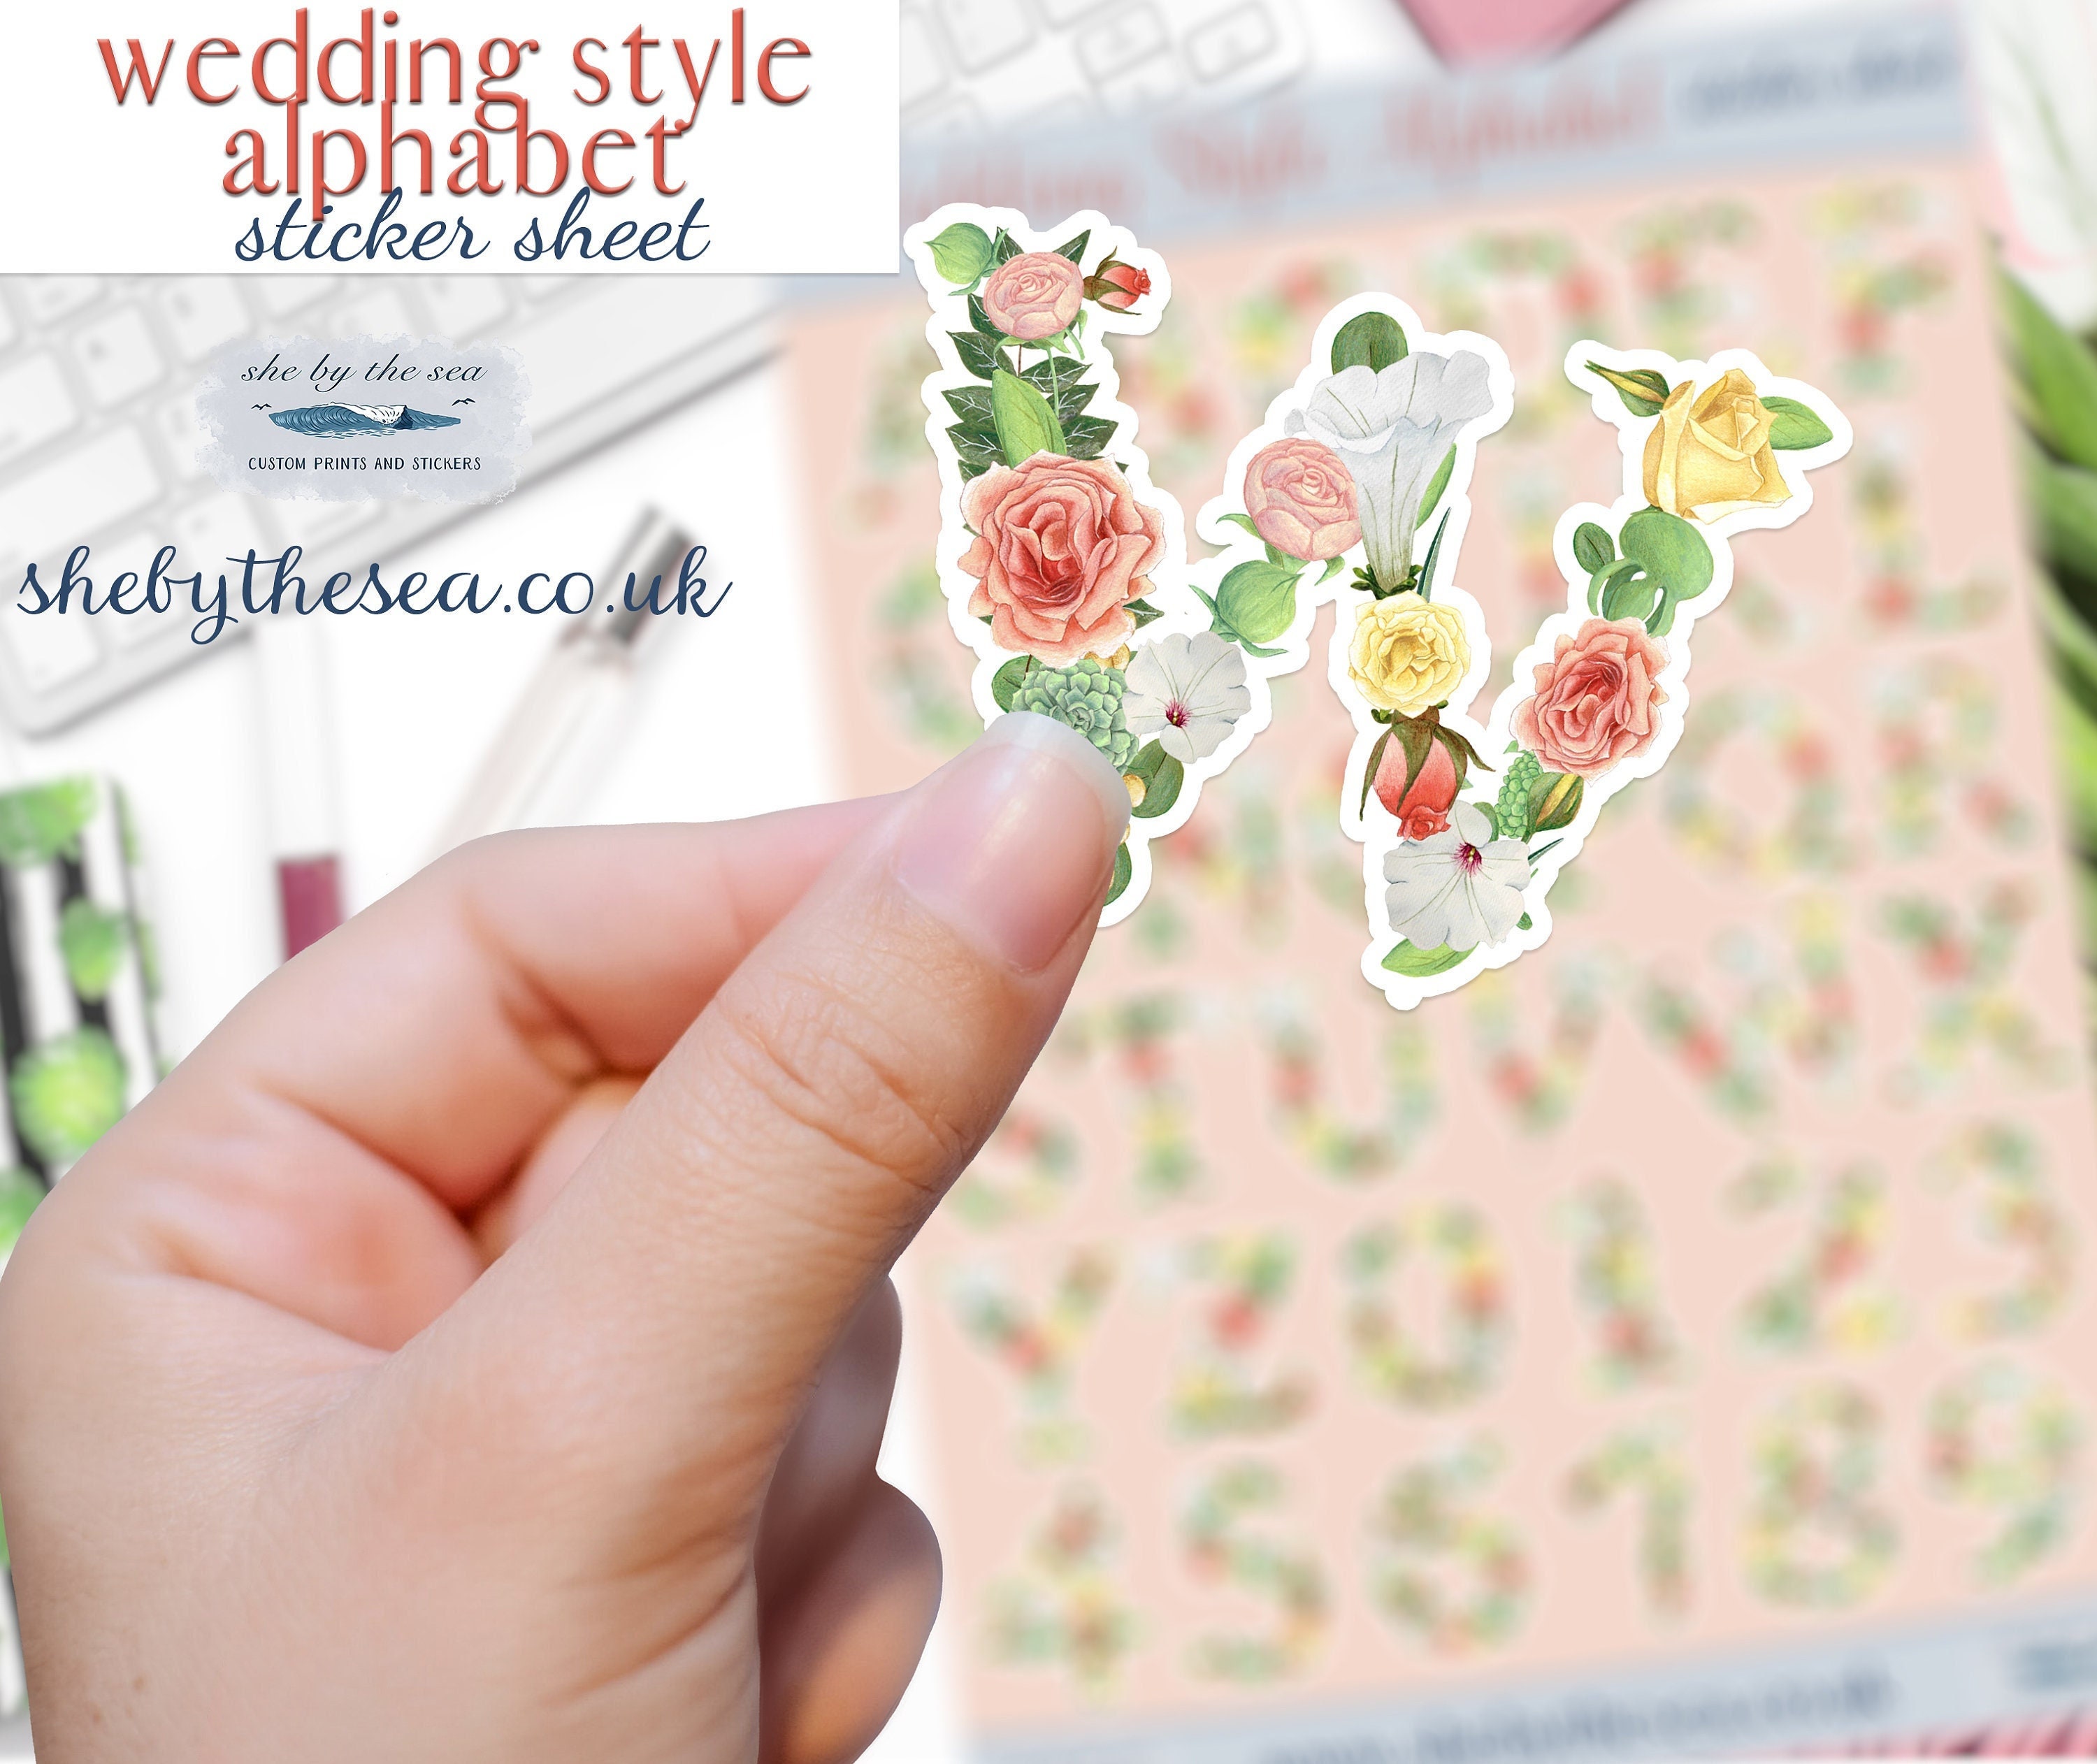 Mini ALPHABET Stickers, Floral Wedding Style, Deco Pastel Flowers Font  Sticker Sheet Made in the UK, Letters and Numbers 4 Planners Journals 